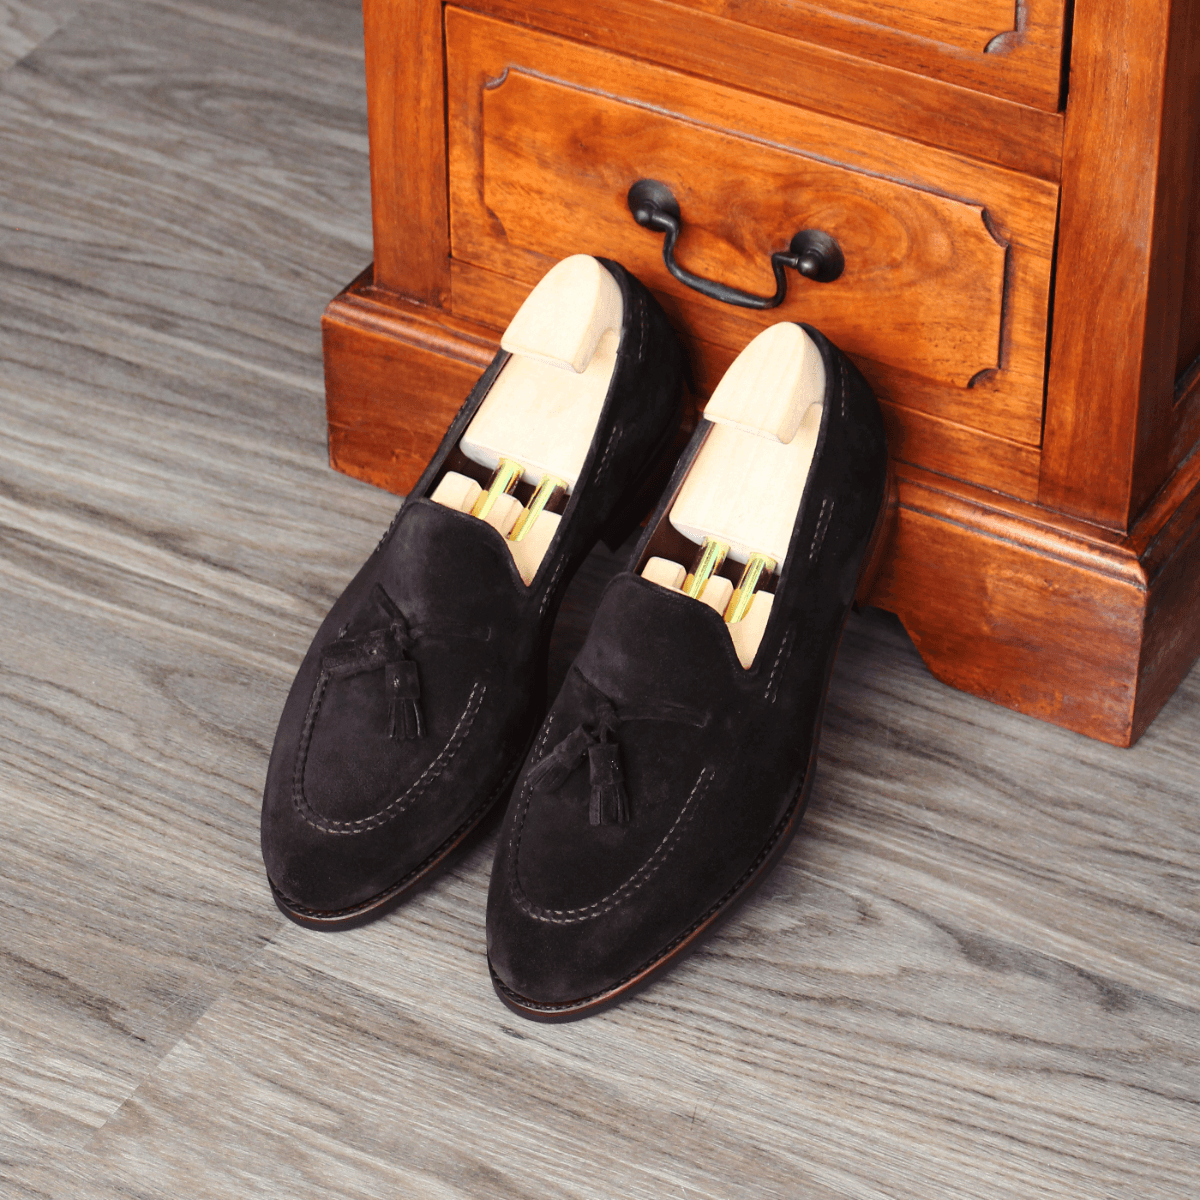 TLB Mallorca - LANCASTER Loafer Dark Brown Suede - Yeossal